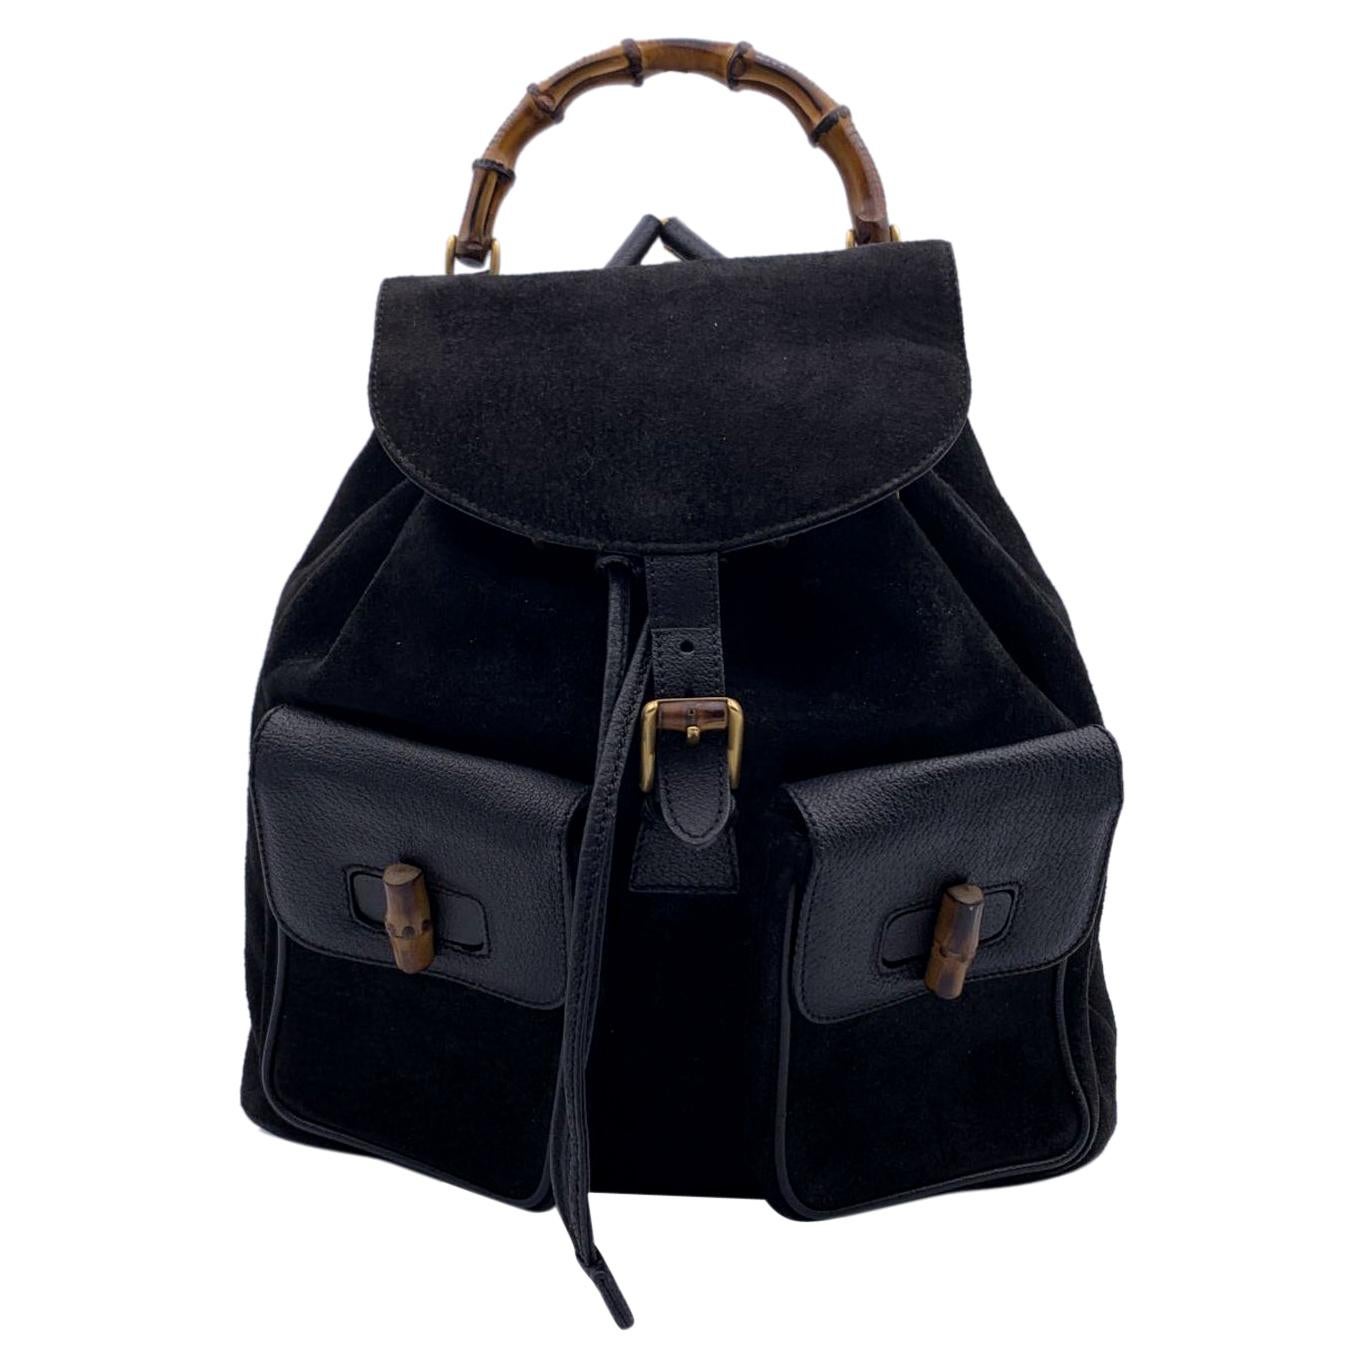 Gucci Vintage Black Leather and Suede Bamboo Backpack Bag